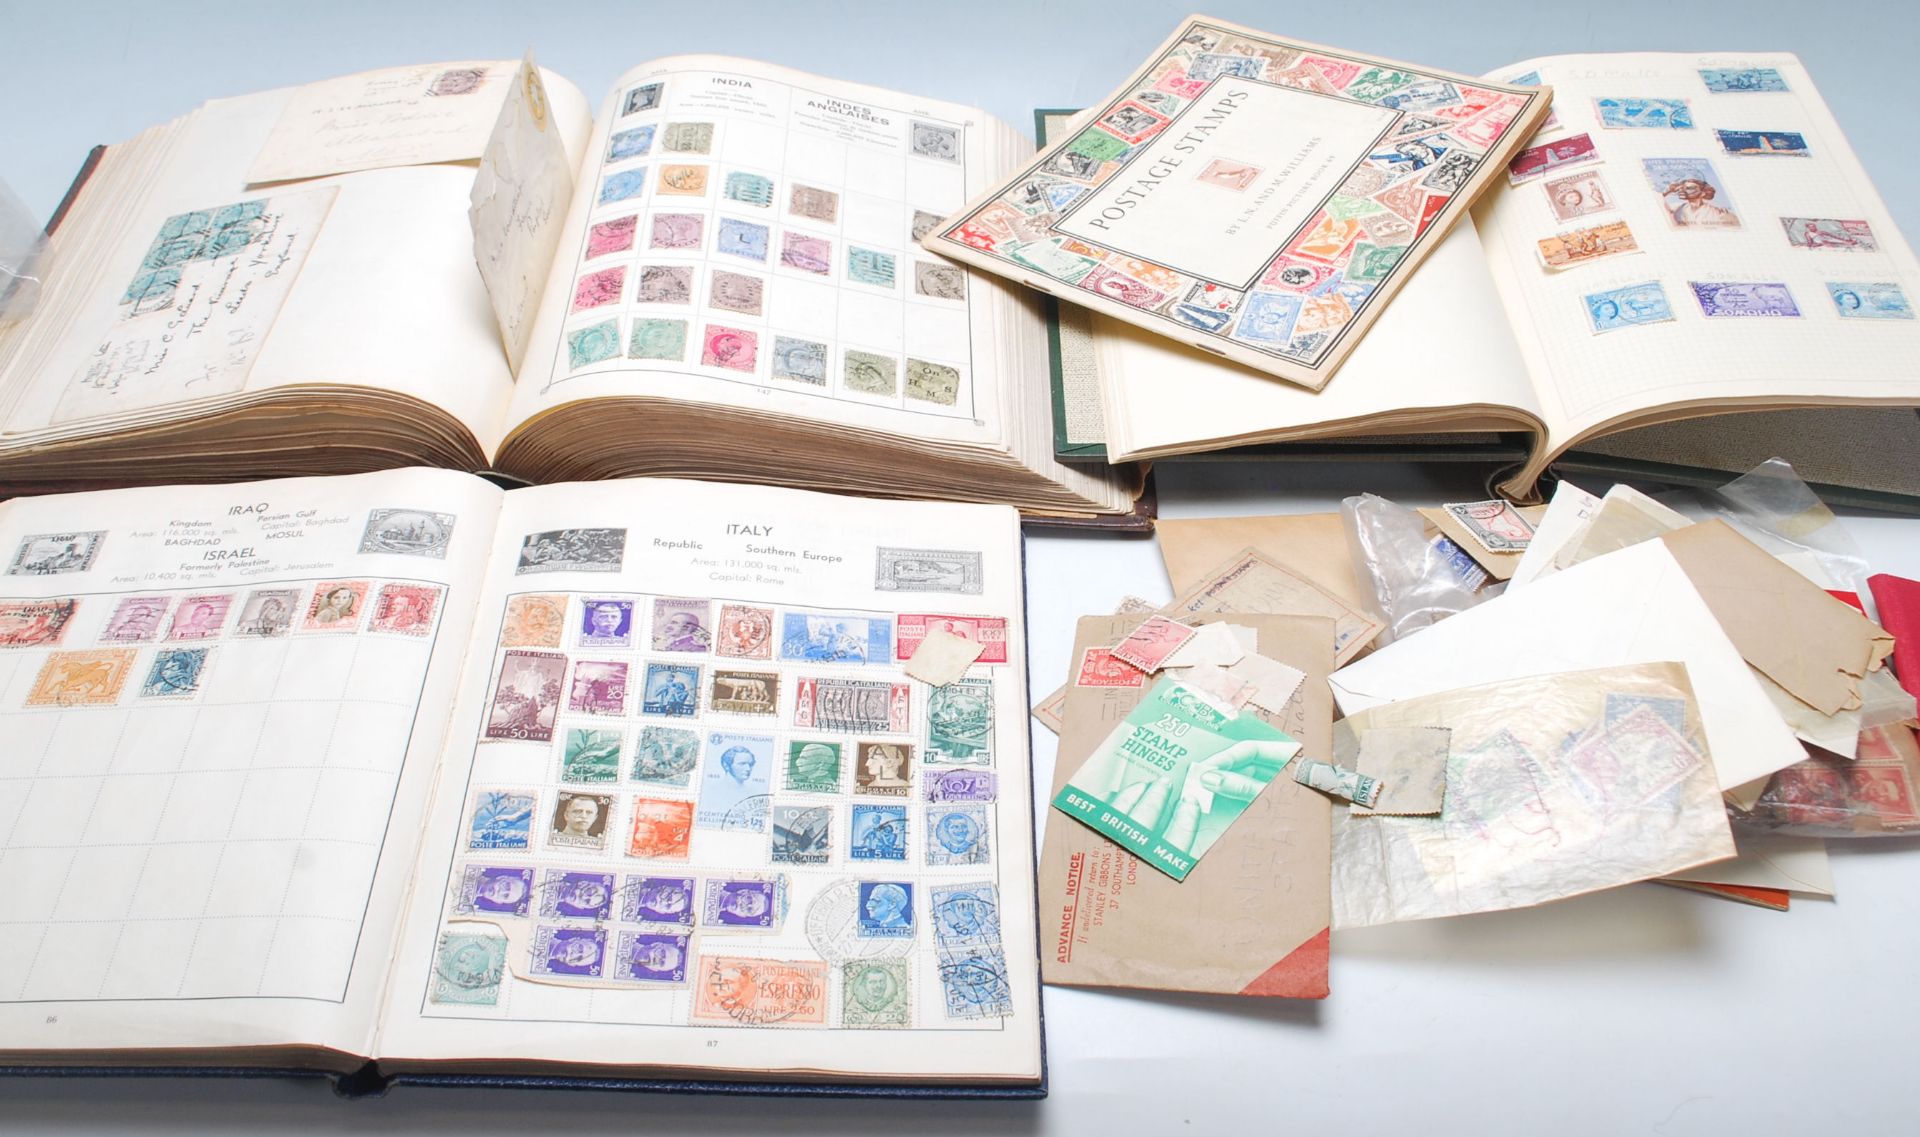 A collection of world stamps across multiple albums to include Great British stamps dating from